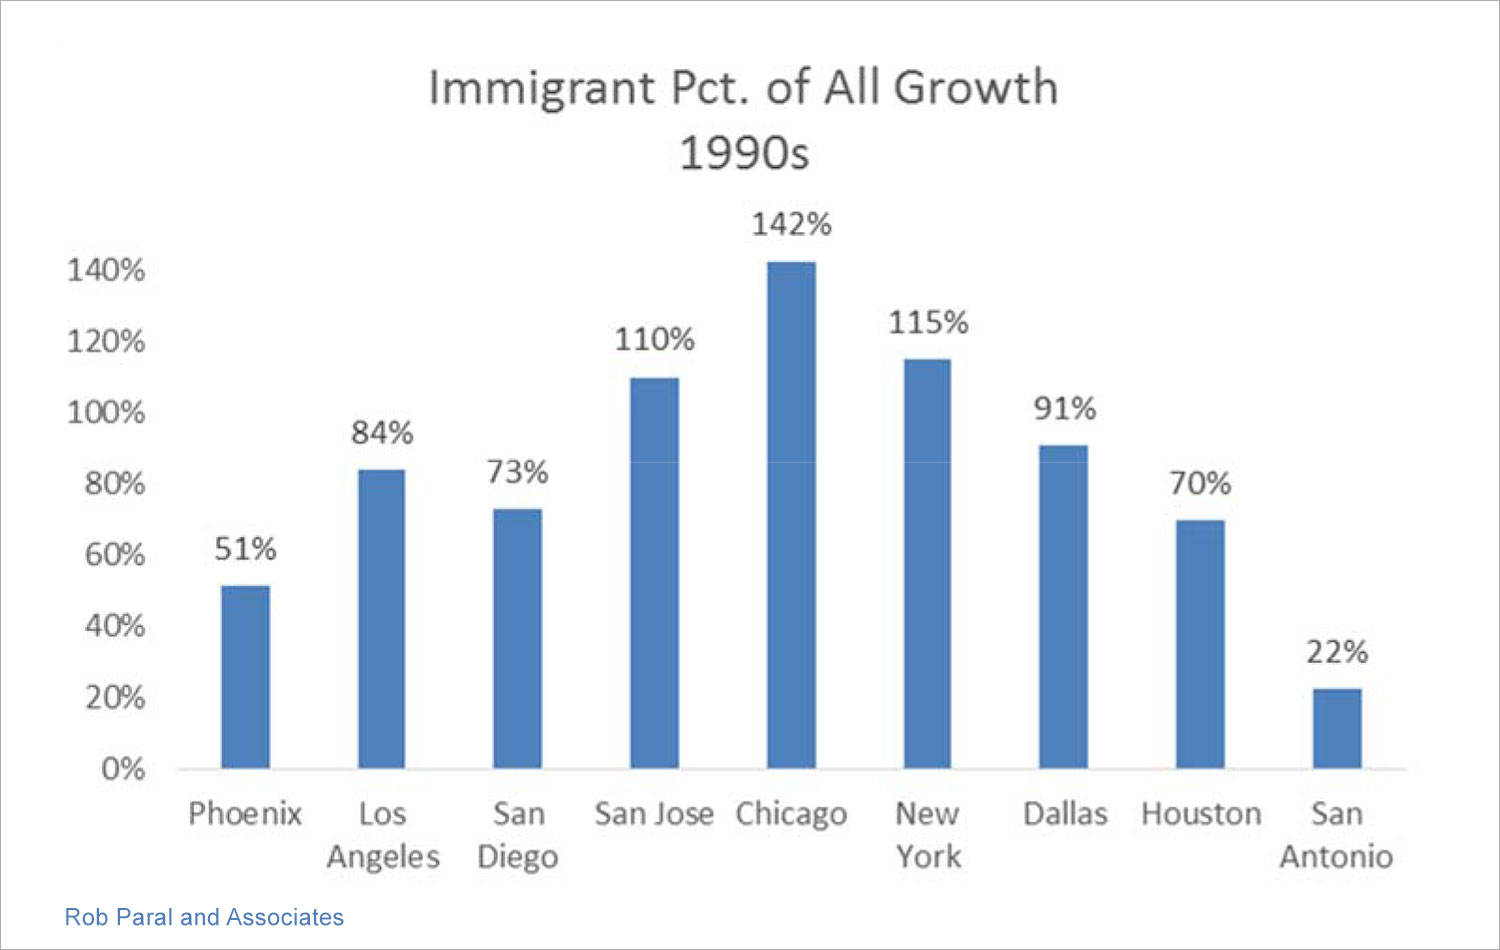 Bar graph showing immigrant percentage of all growth